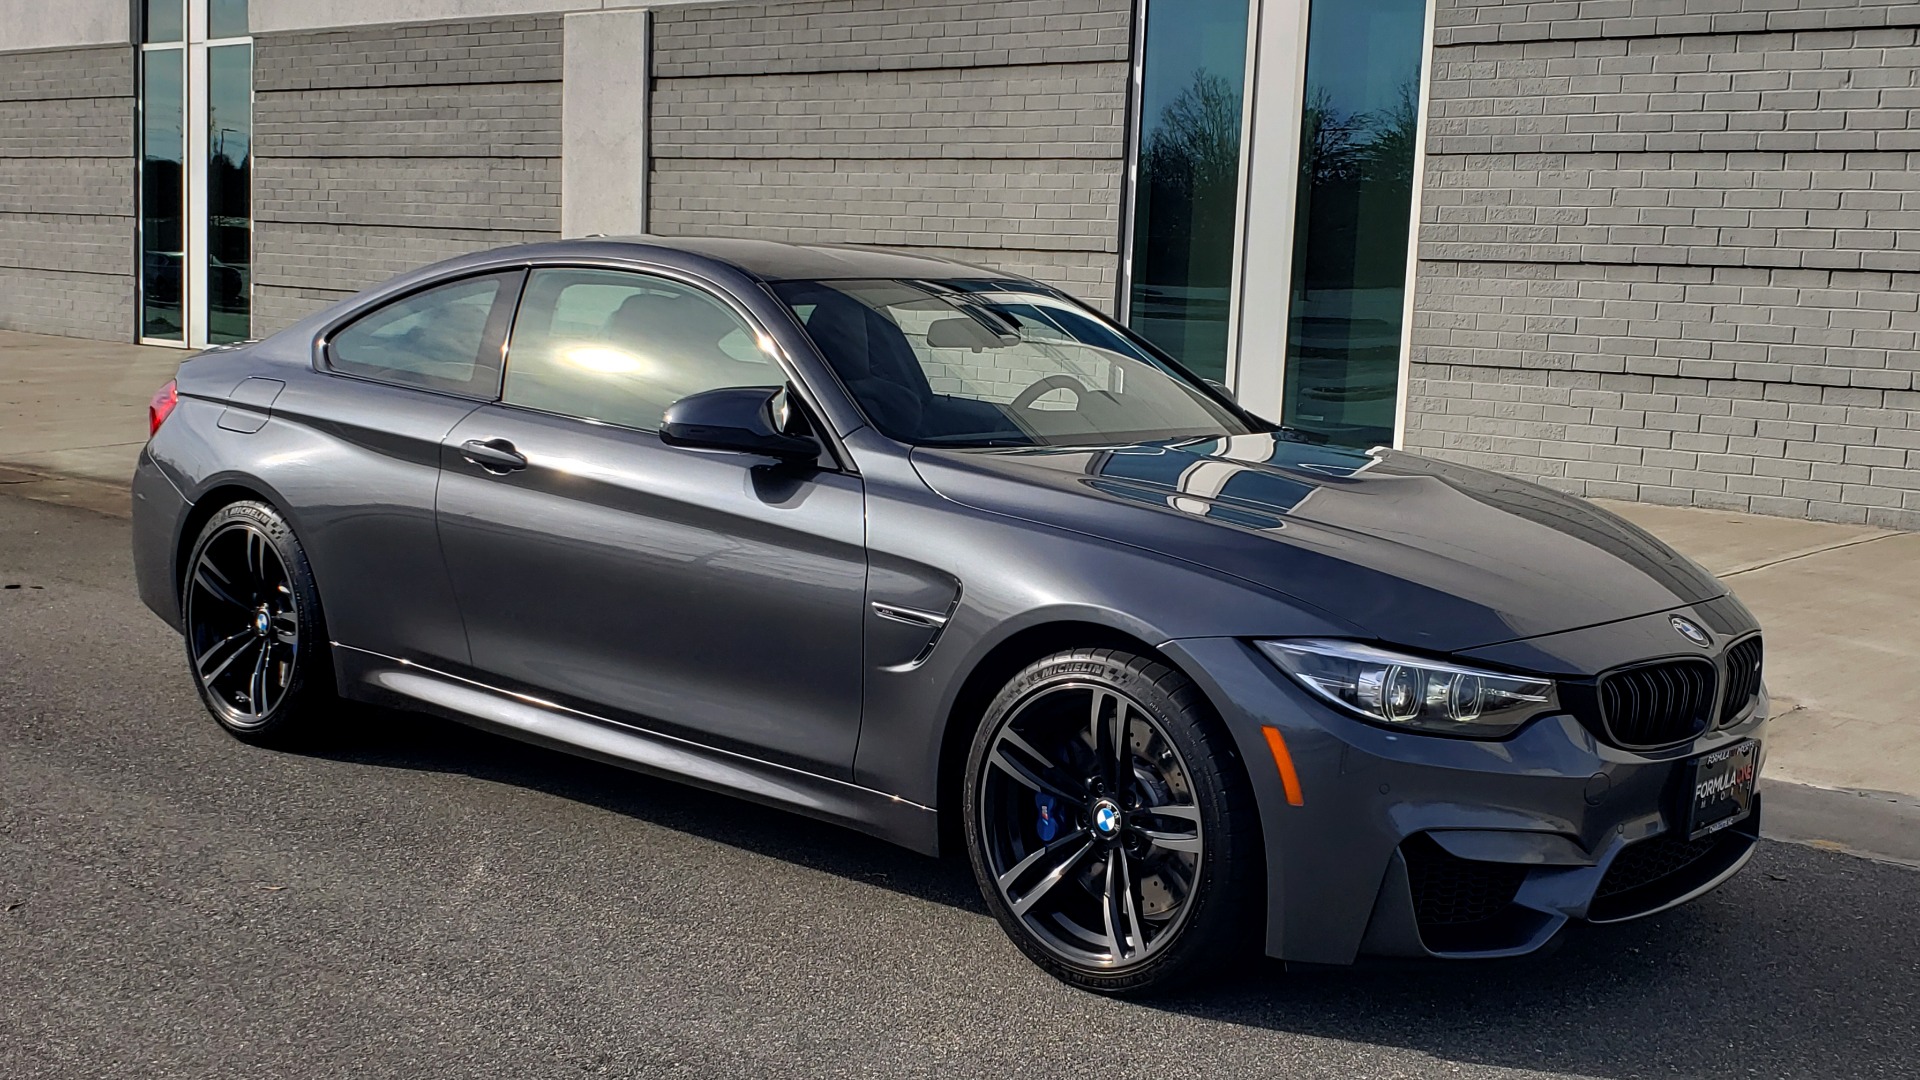 Used 2019 BMW M4 COUPE 3.0L 425HP / 7-SPD AUTO / NAV / 19-IN WHEELS / REARVIEW for sale $67,999 at Formula Imports in Charlotte NC 28227 13